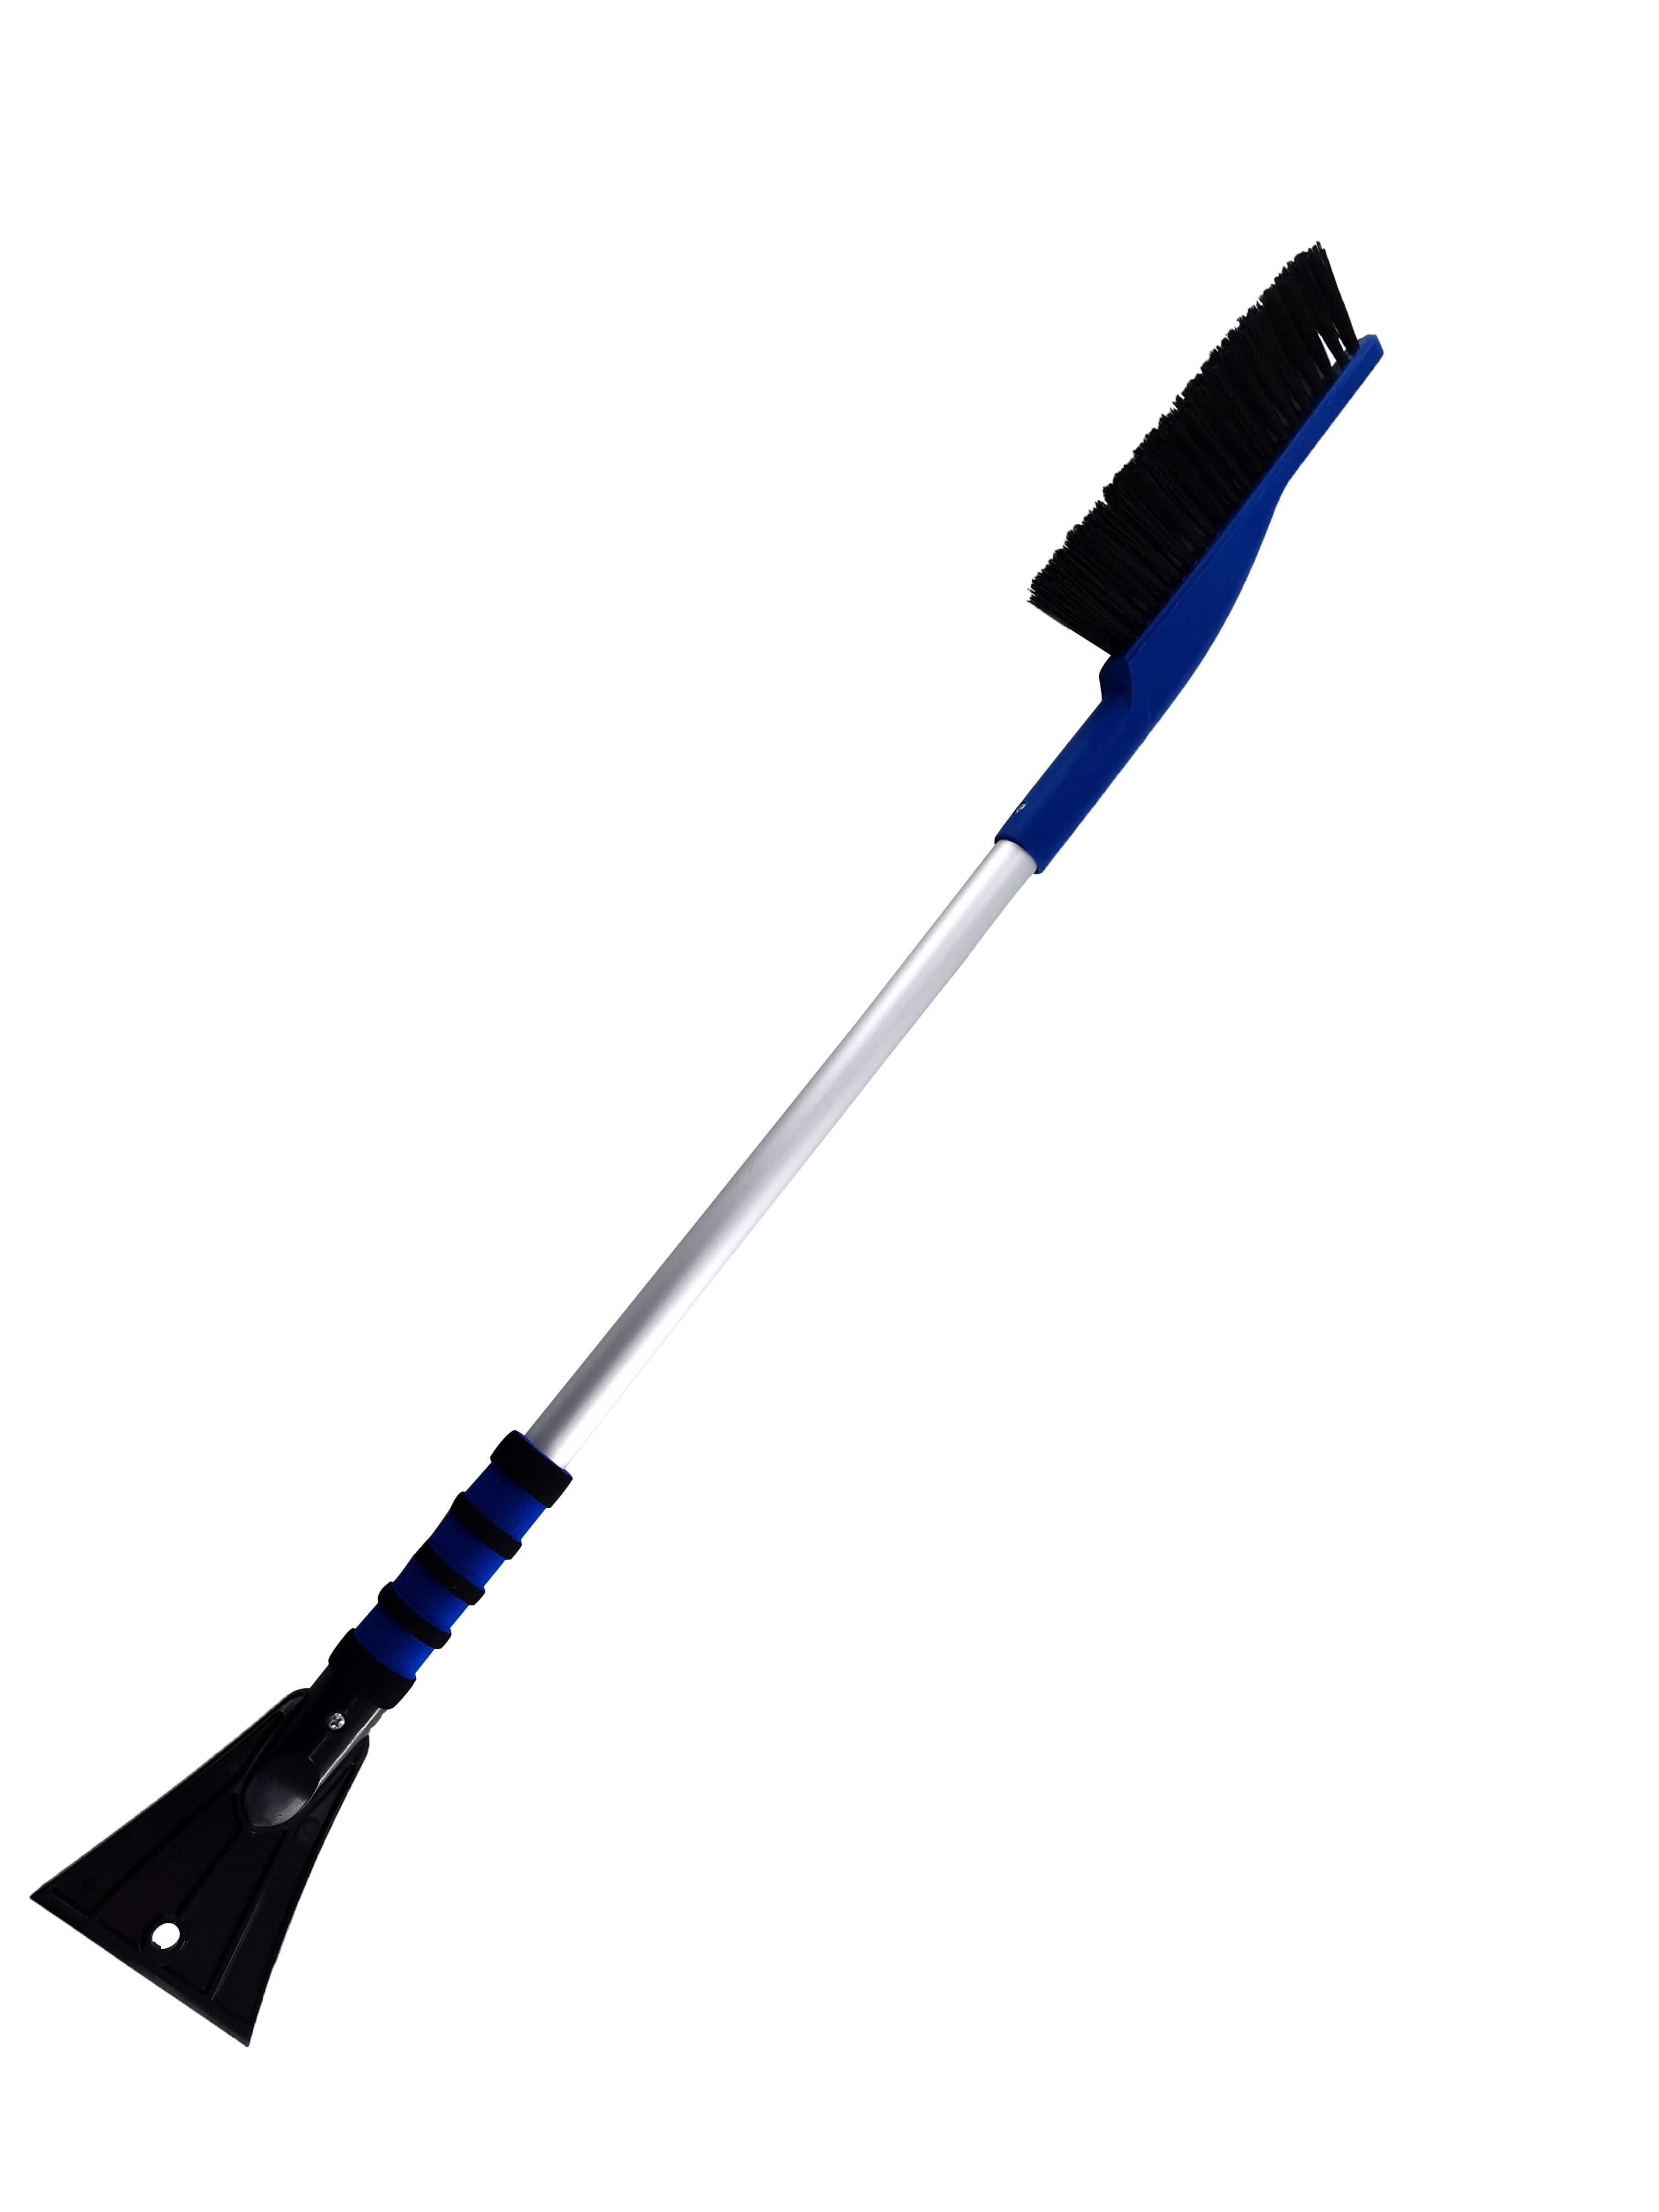 Auto Drive Winter Driving Snow Brush with Scraper, 35" Length, Blue